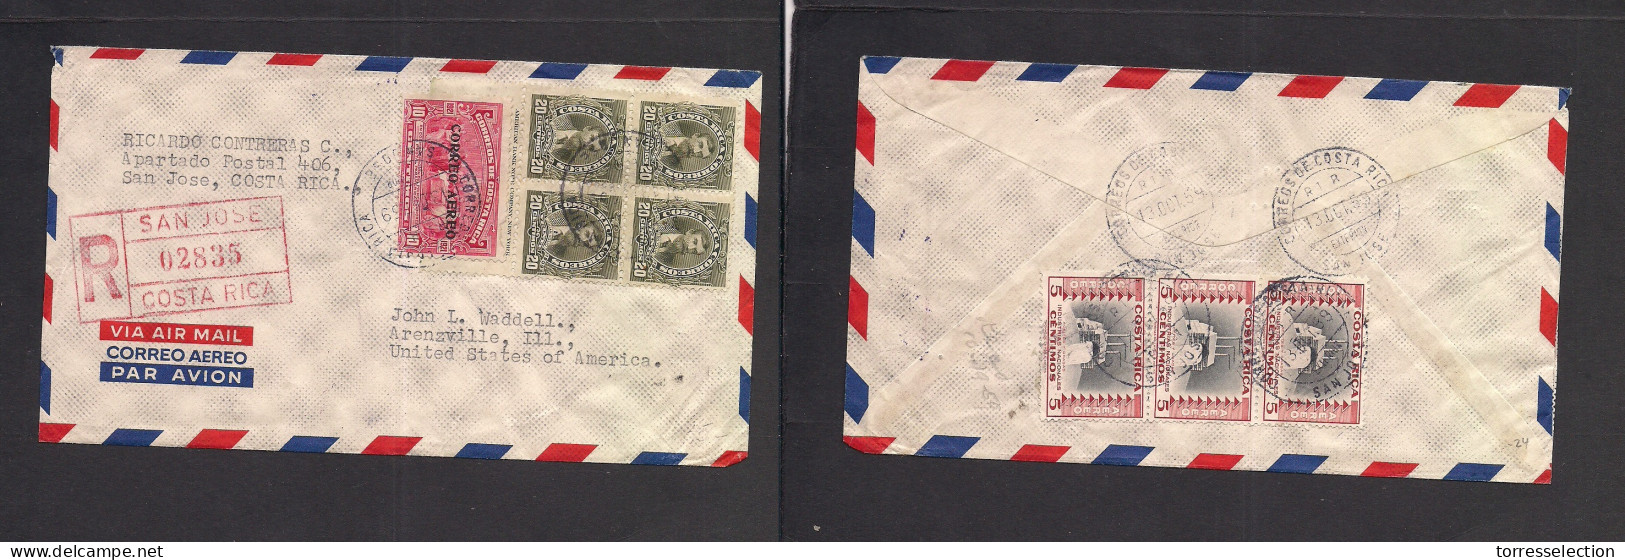 COSTA RICA. 1959 (13 Oct) San Jose - USA, Arenzville, Ill. Registered Multifkd Front And Reverse Env. ABN Issues.VF. XSA - Costa Rica